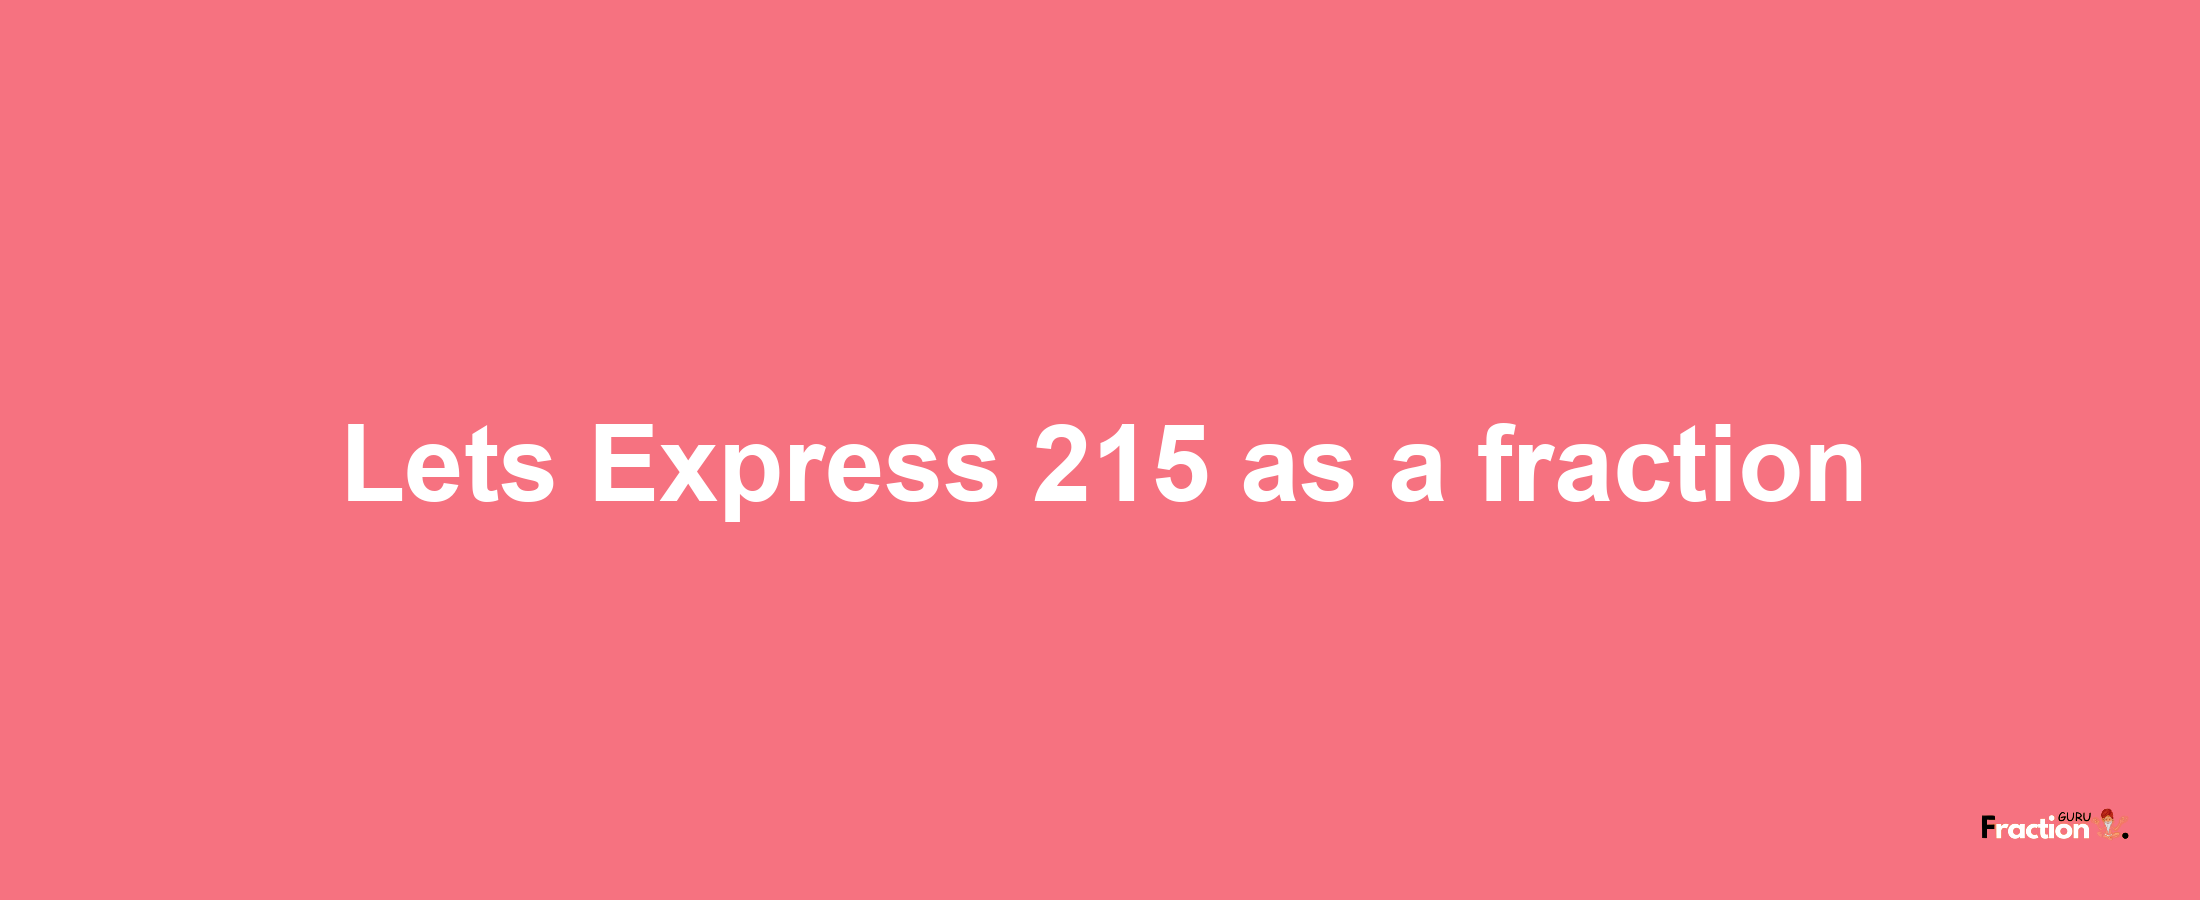 Lets Express 215 as afraction